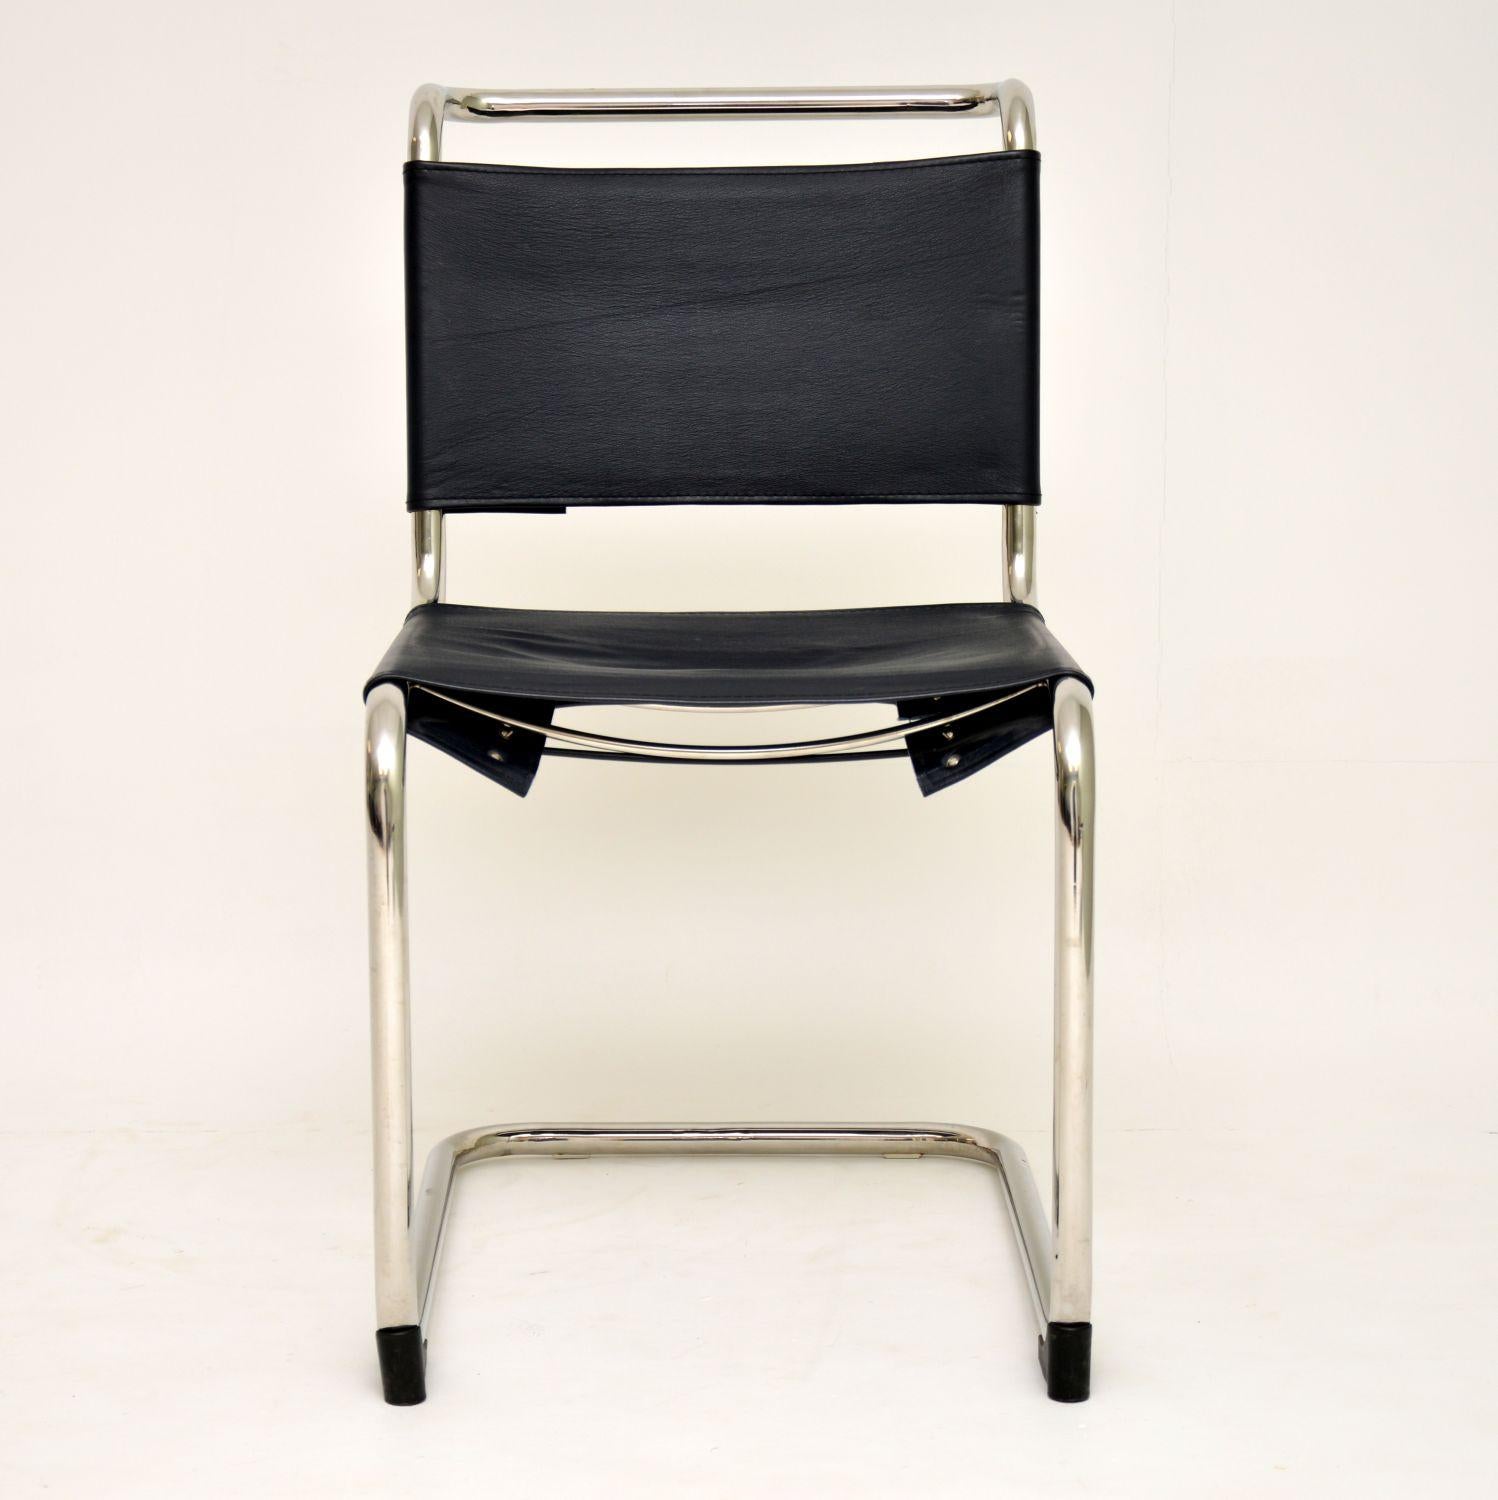 European Vintage Steel and Leather Cantilever S33 Chair by Mart Stam